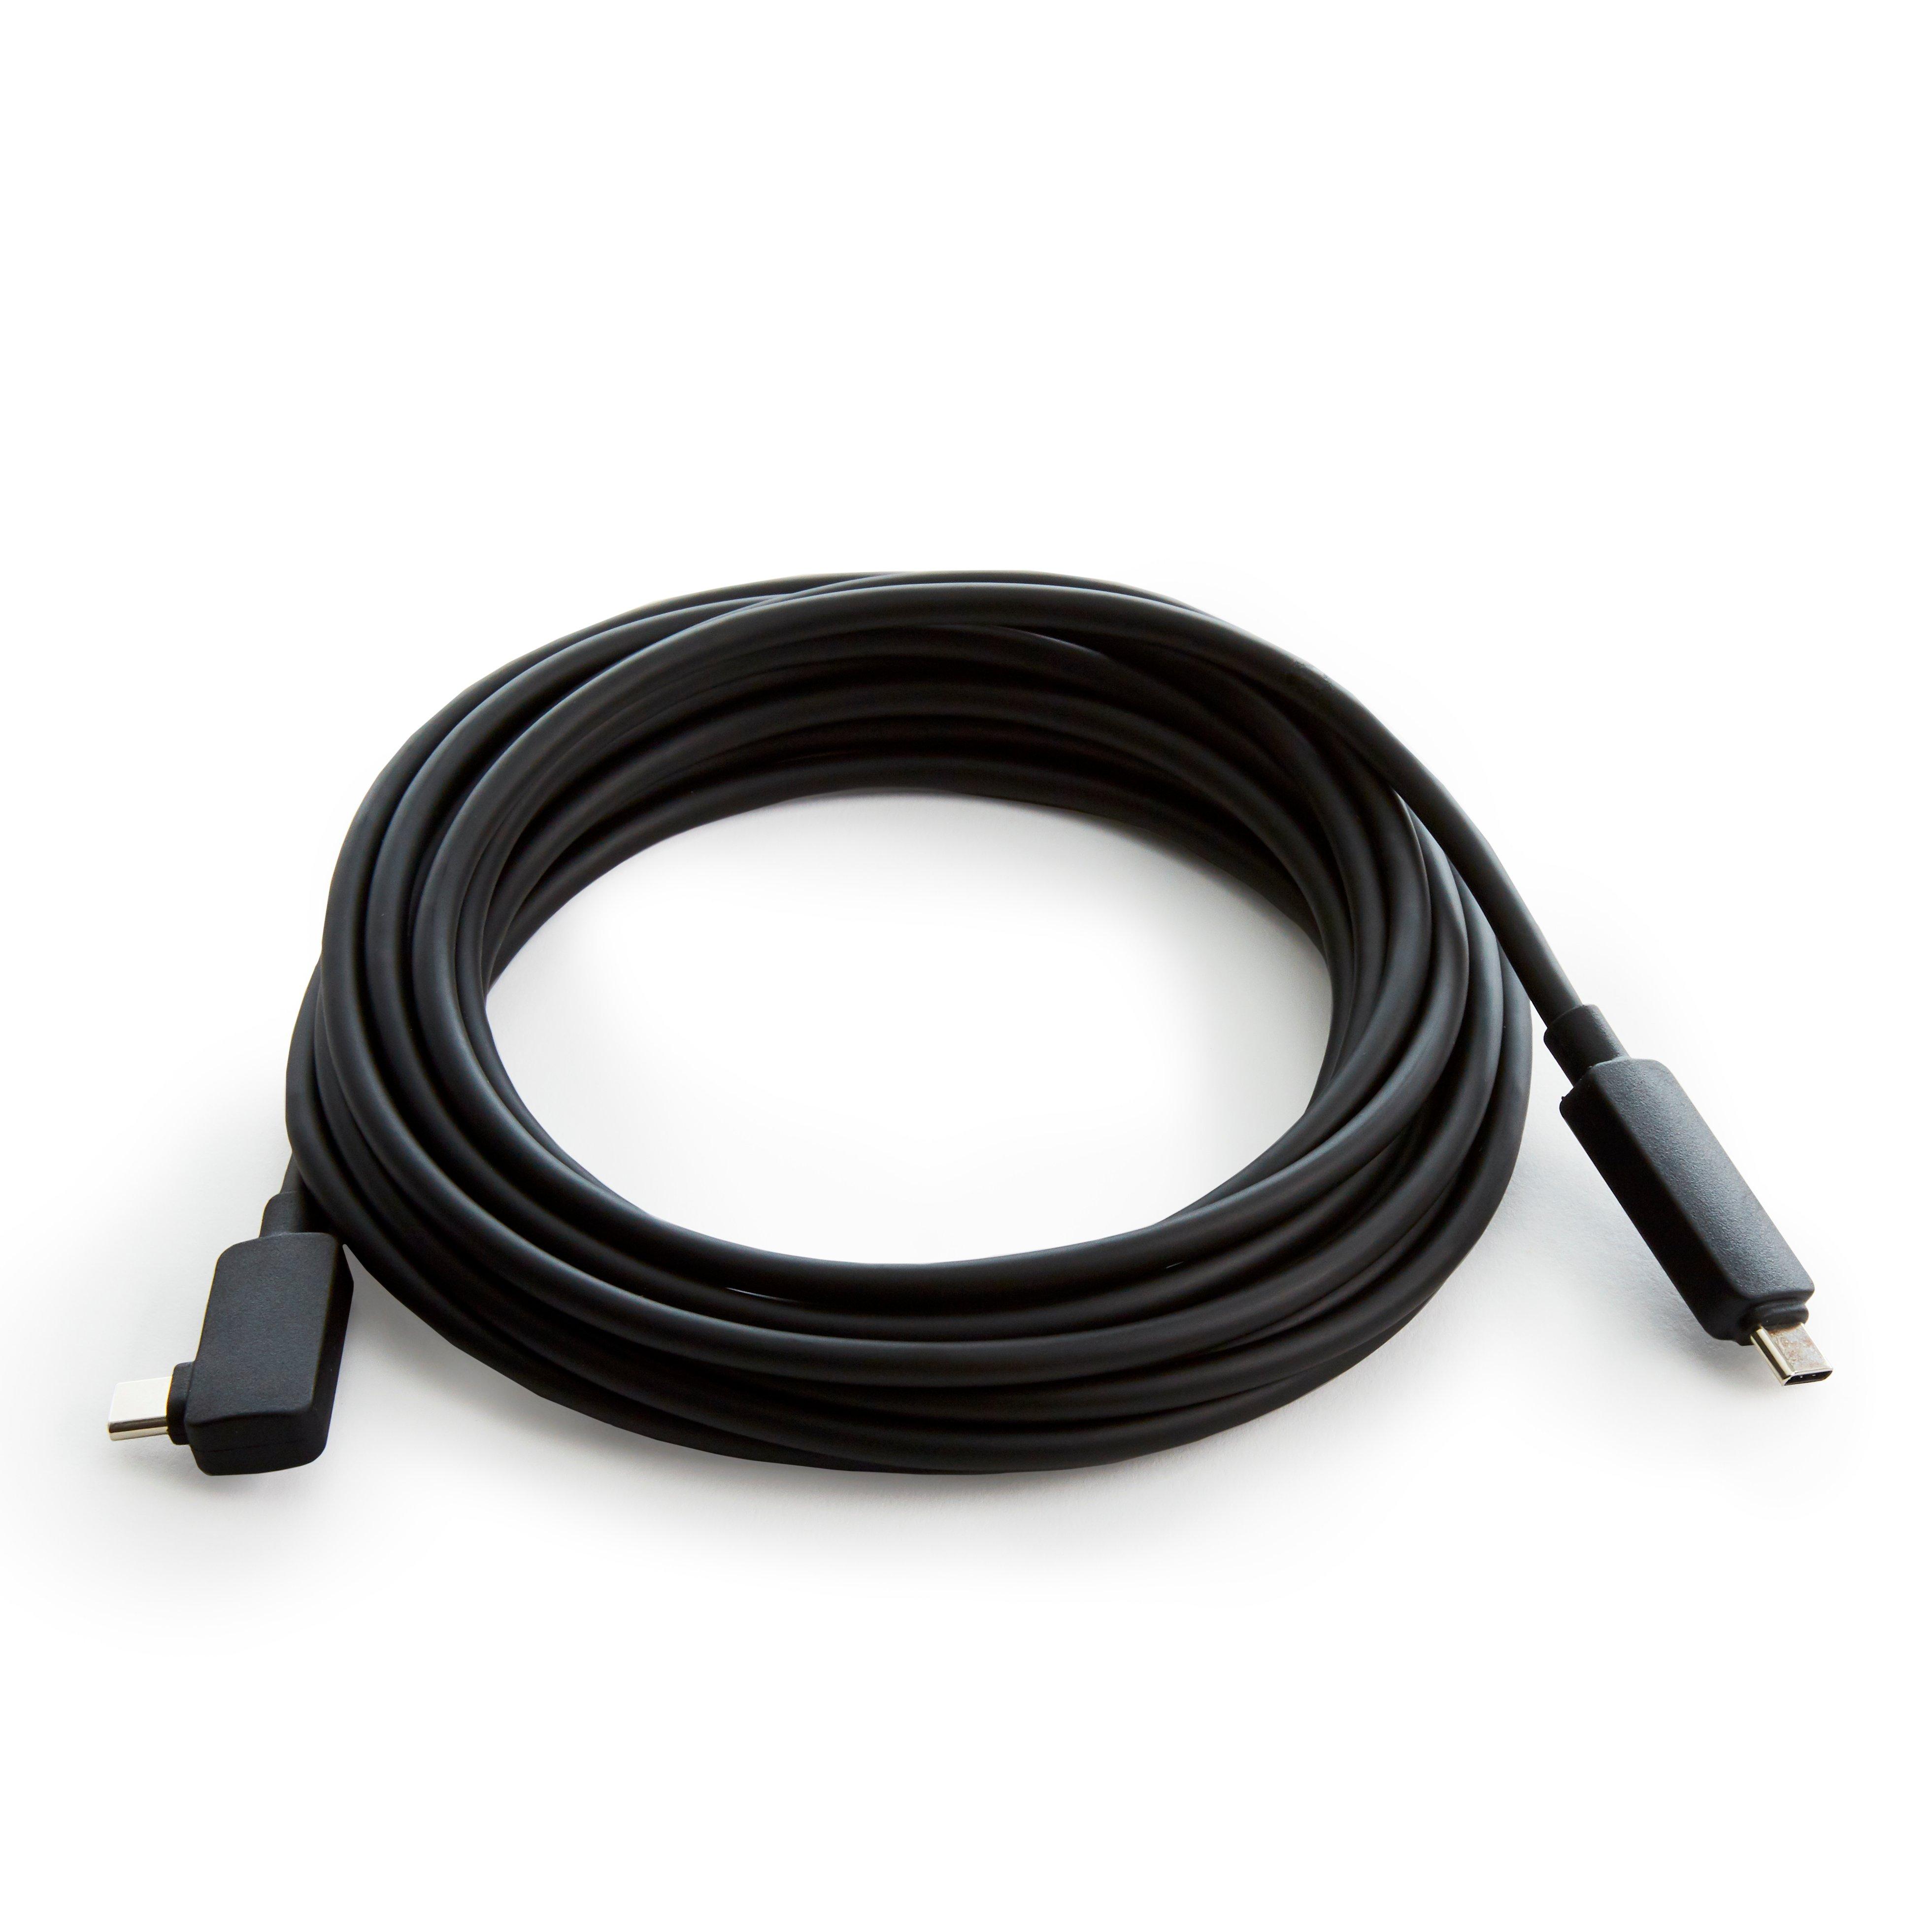 for Oculus Quest Link Cable, USB 3.0 USB A to USB C Cable 16FT